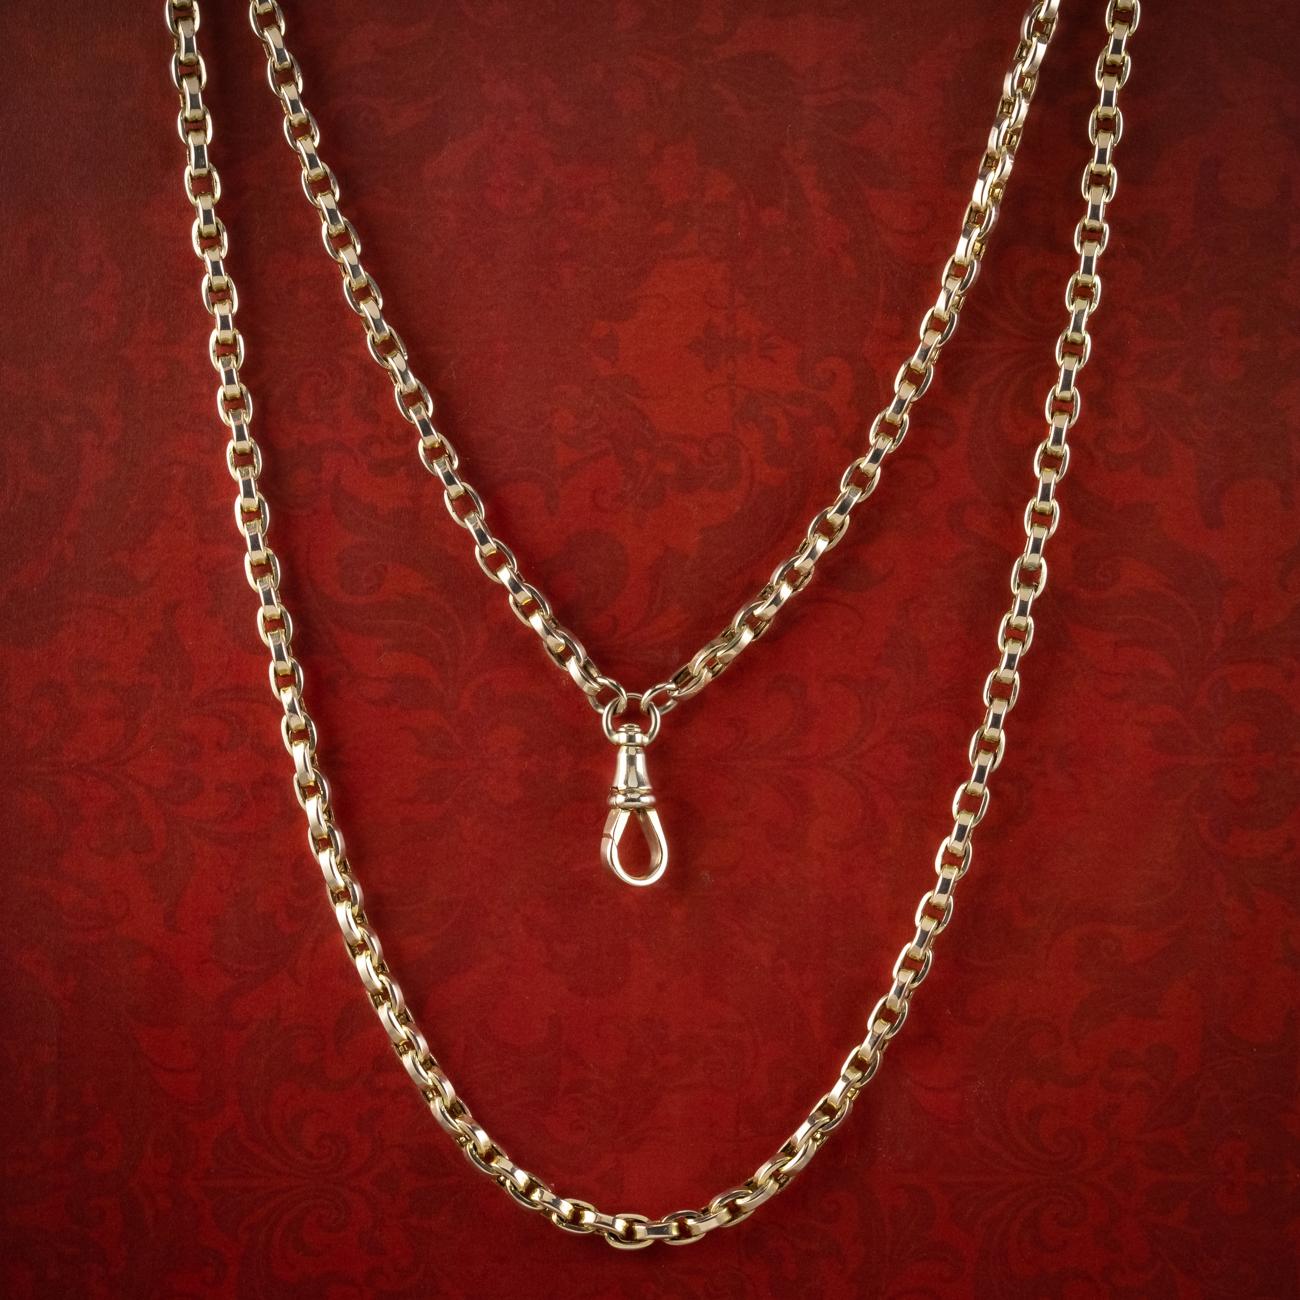 A luxurious antique Victorian guard chain made up of solid cable links fashioned in 9ct gold. Each link is lovely and smooth with a muted golden tone and is fitted with the classic claw clasp at the end.

Guard chains were at the height of